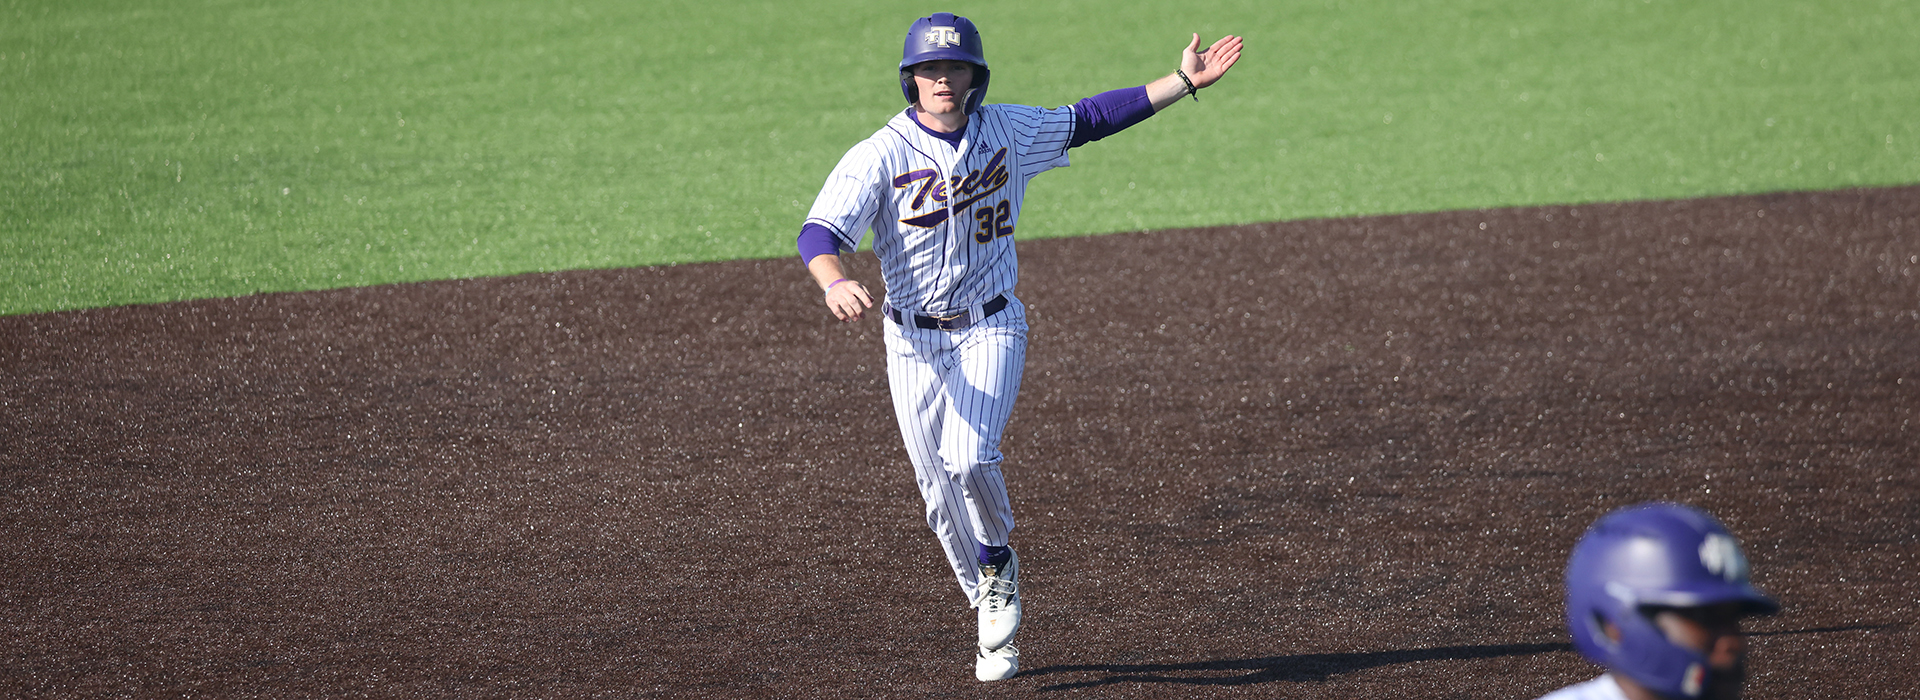 Tech splits double dip with Davidson, walks off Wildcats in game two